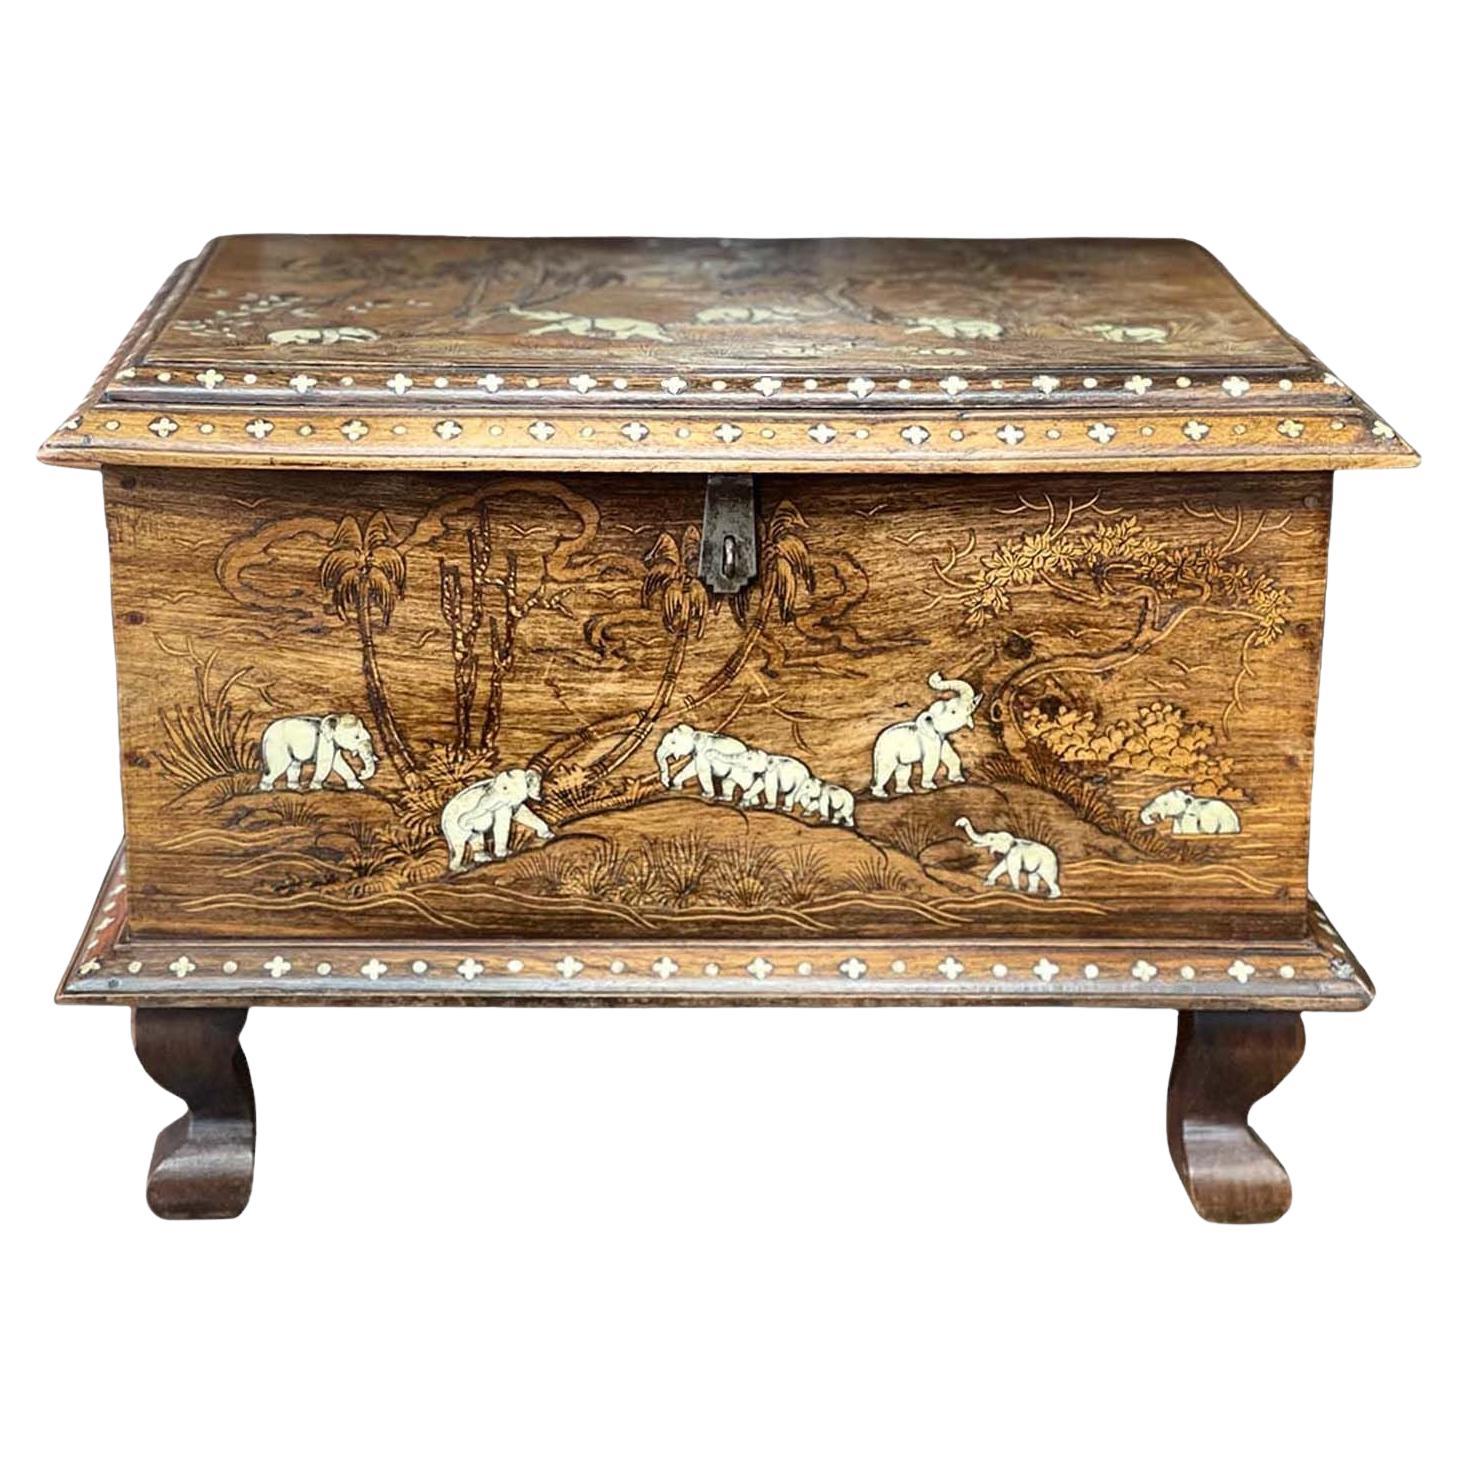 Anglo-Indian Inlaid Elephant Motif Box For Sale